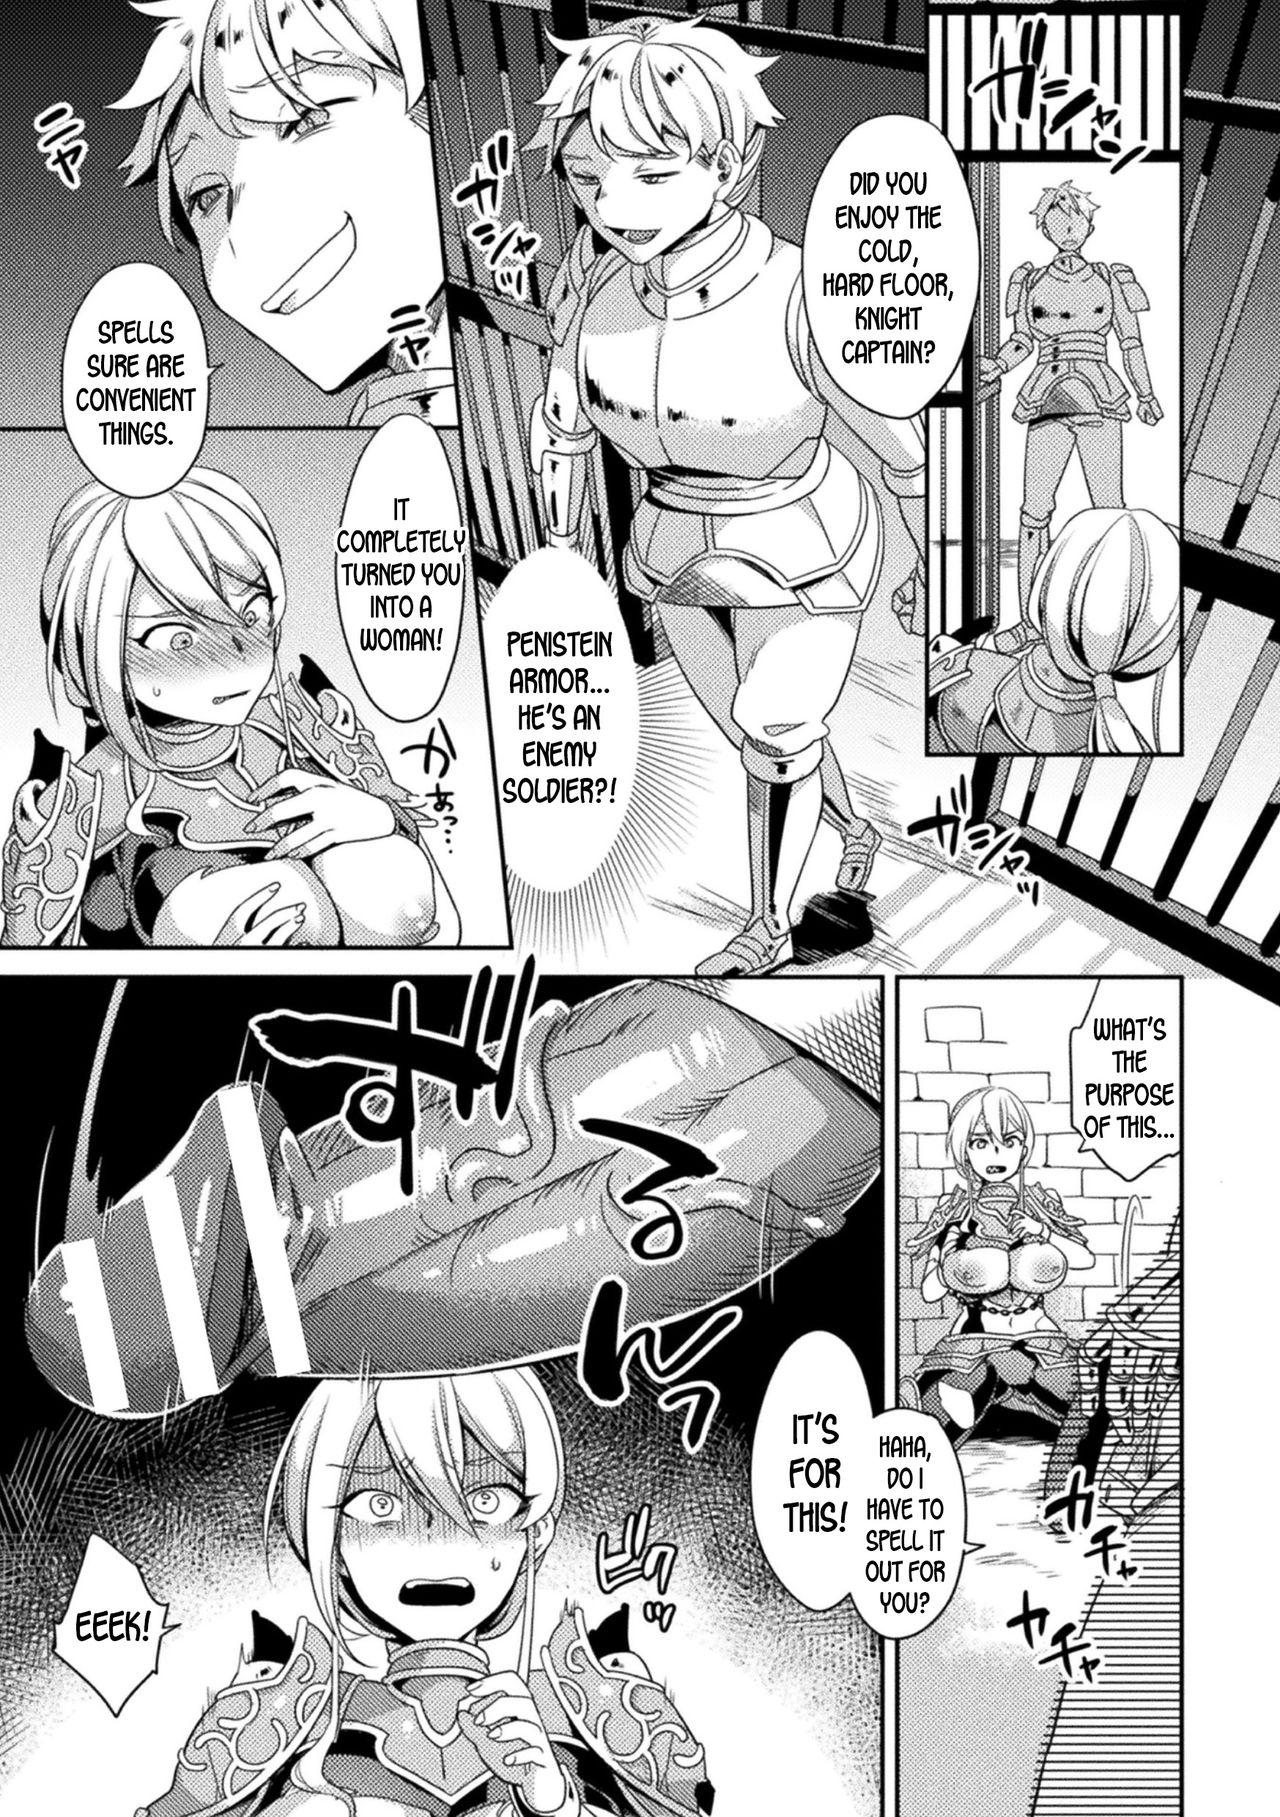 Russian Genderbent Knight Raul, the Fallen Whore ~ He couldn't win against money and cocks Aussie - Page 3